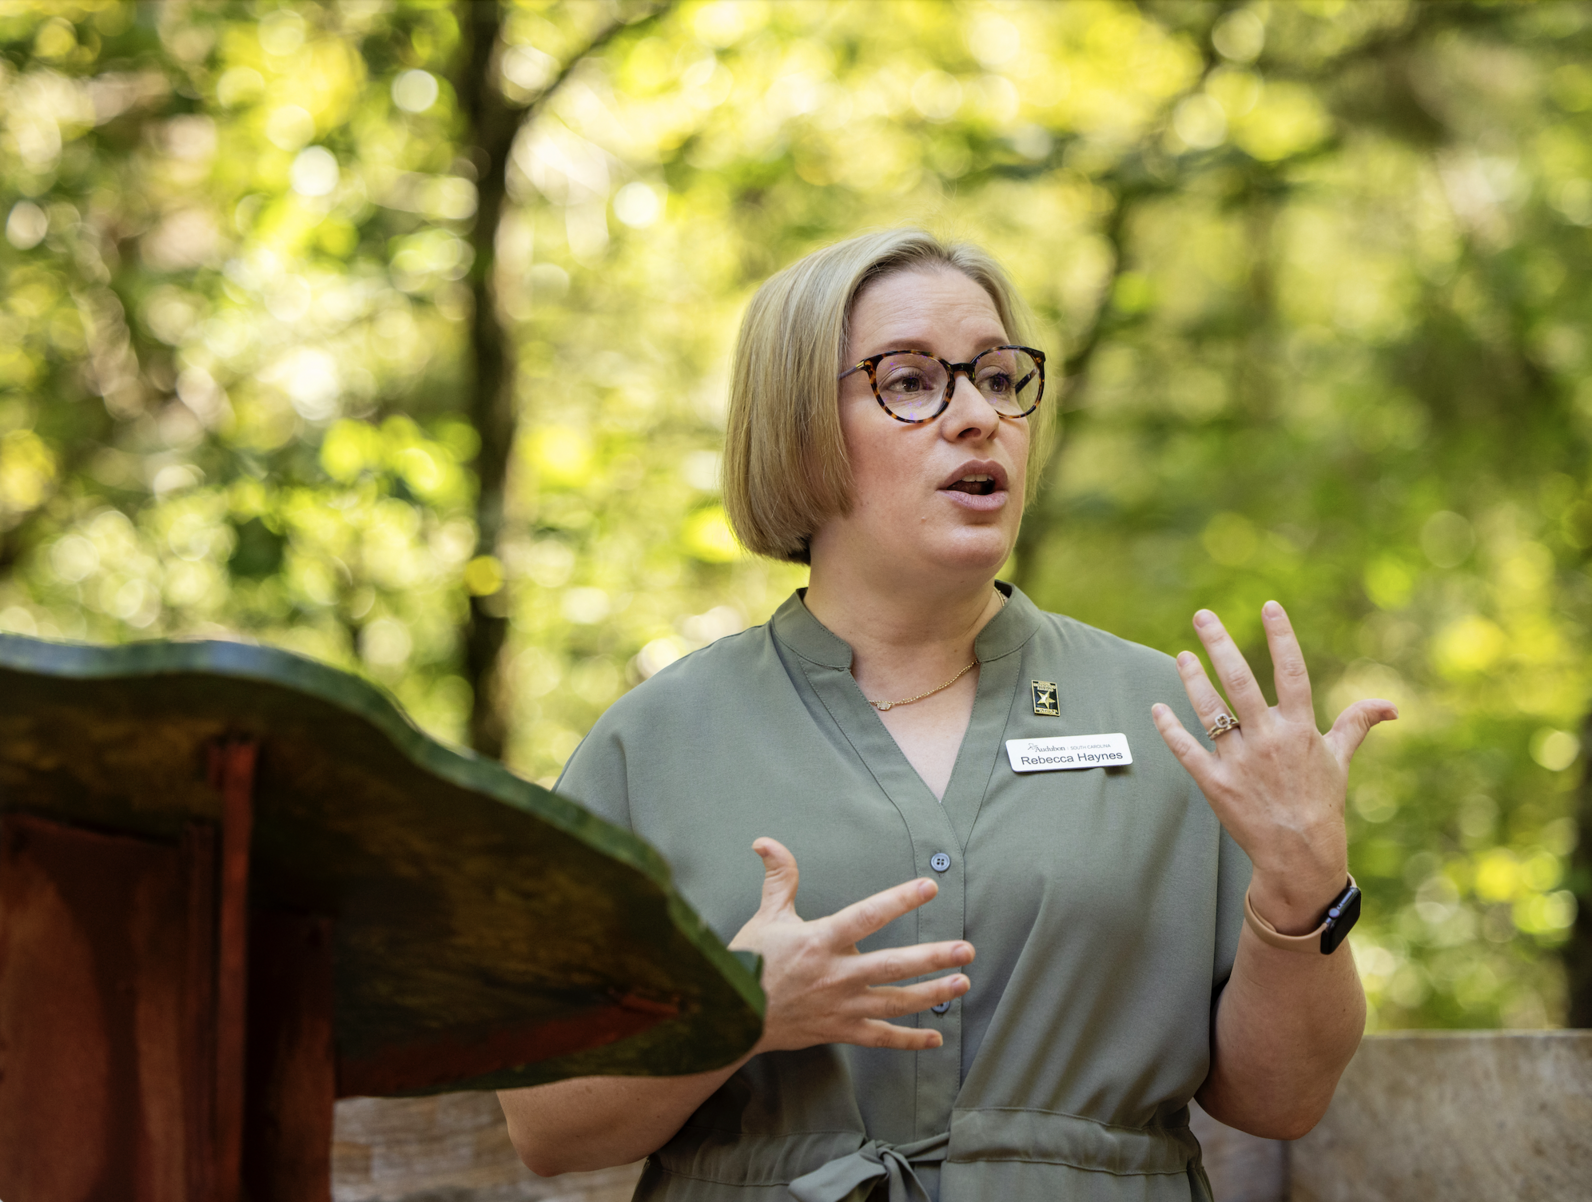 Audubon South Carolina Executive Director Rebecca Haynes discusses the organization's commitment to sharing and interpreting both the natural and cultural history of Four Holes Swamp and other Audubon-stewarded lands.